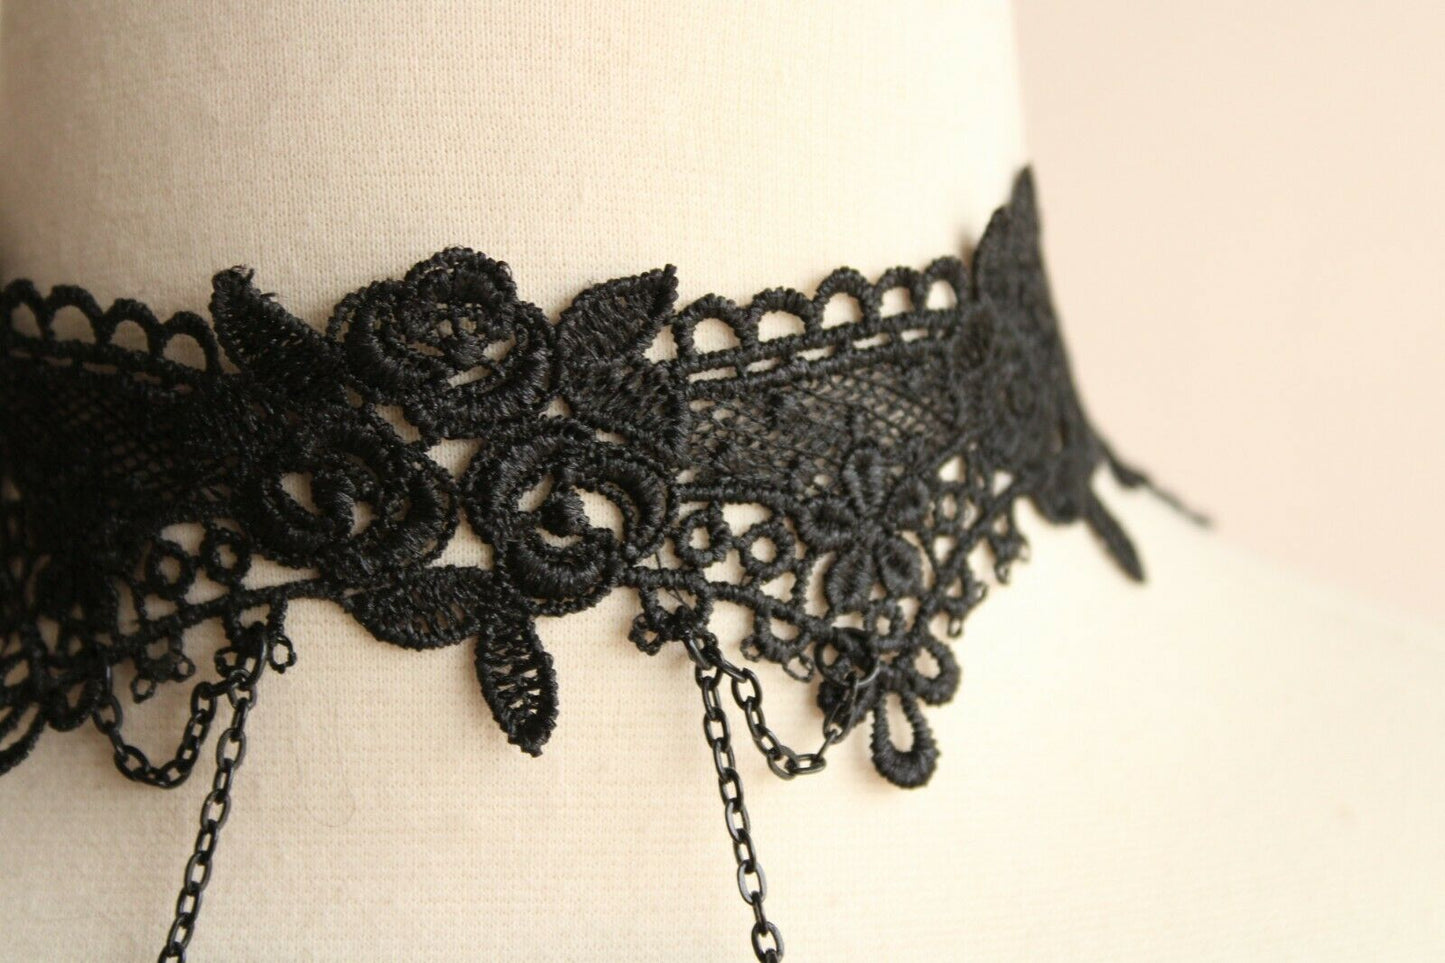 Goth Choker Necklace, Black Lace and Bats